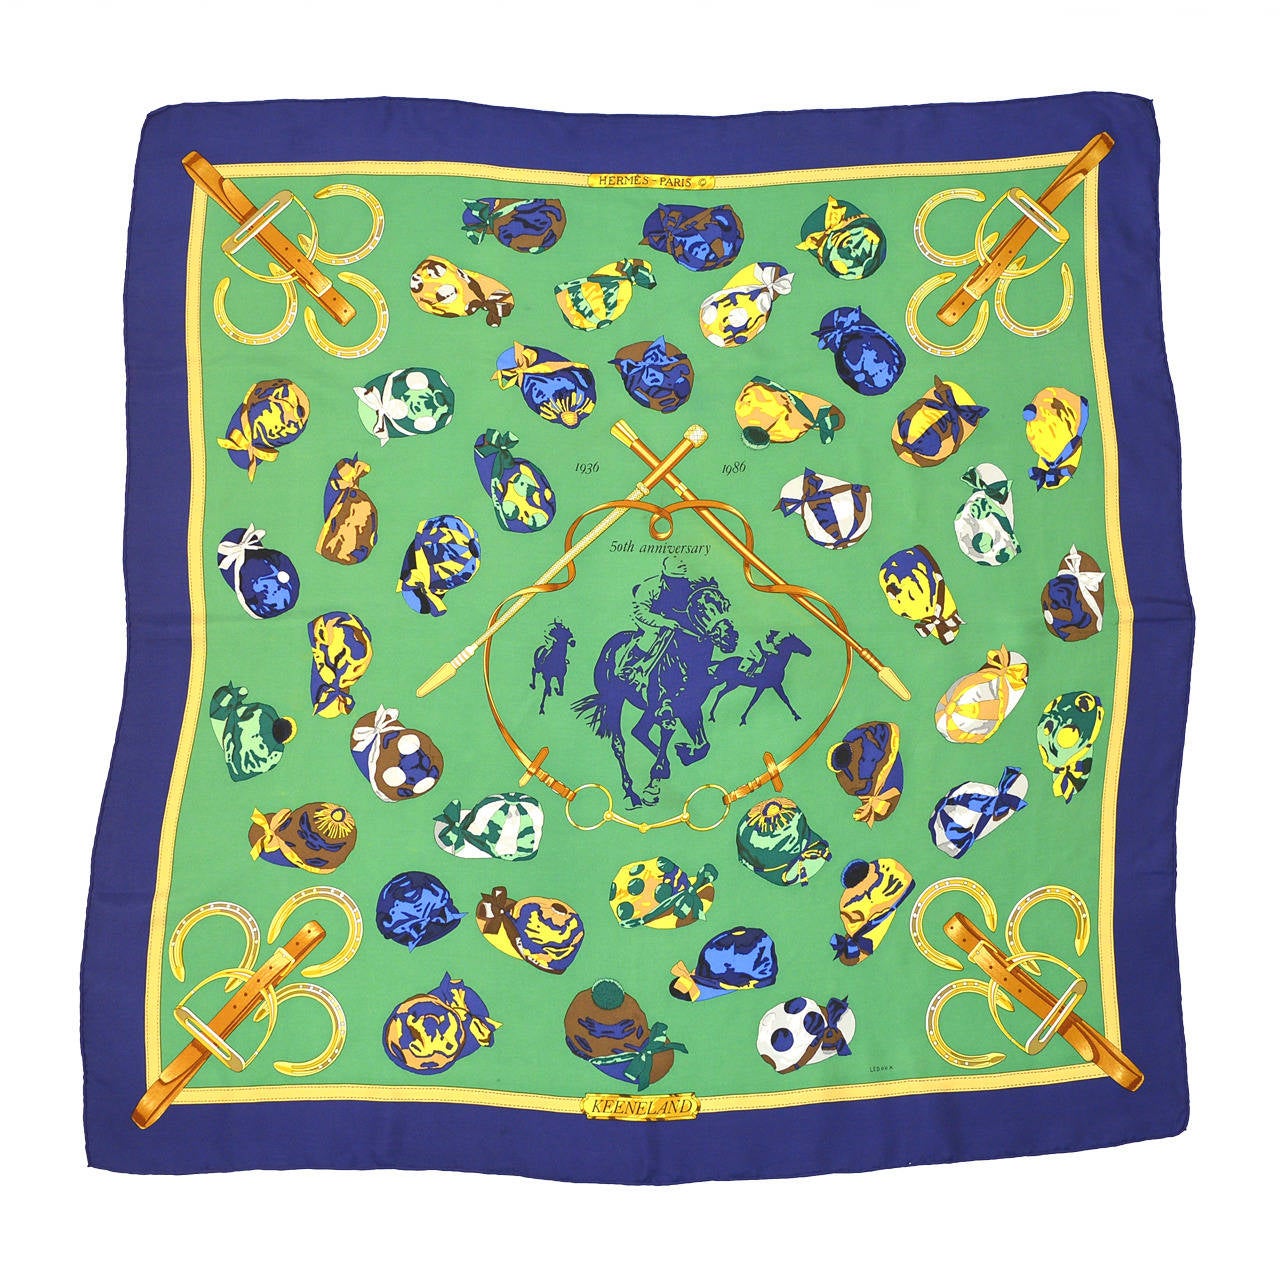 Special Edition Hermes Scarf in Original Box For Sale at 1stdibs